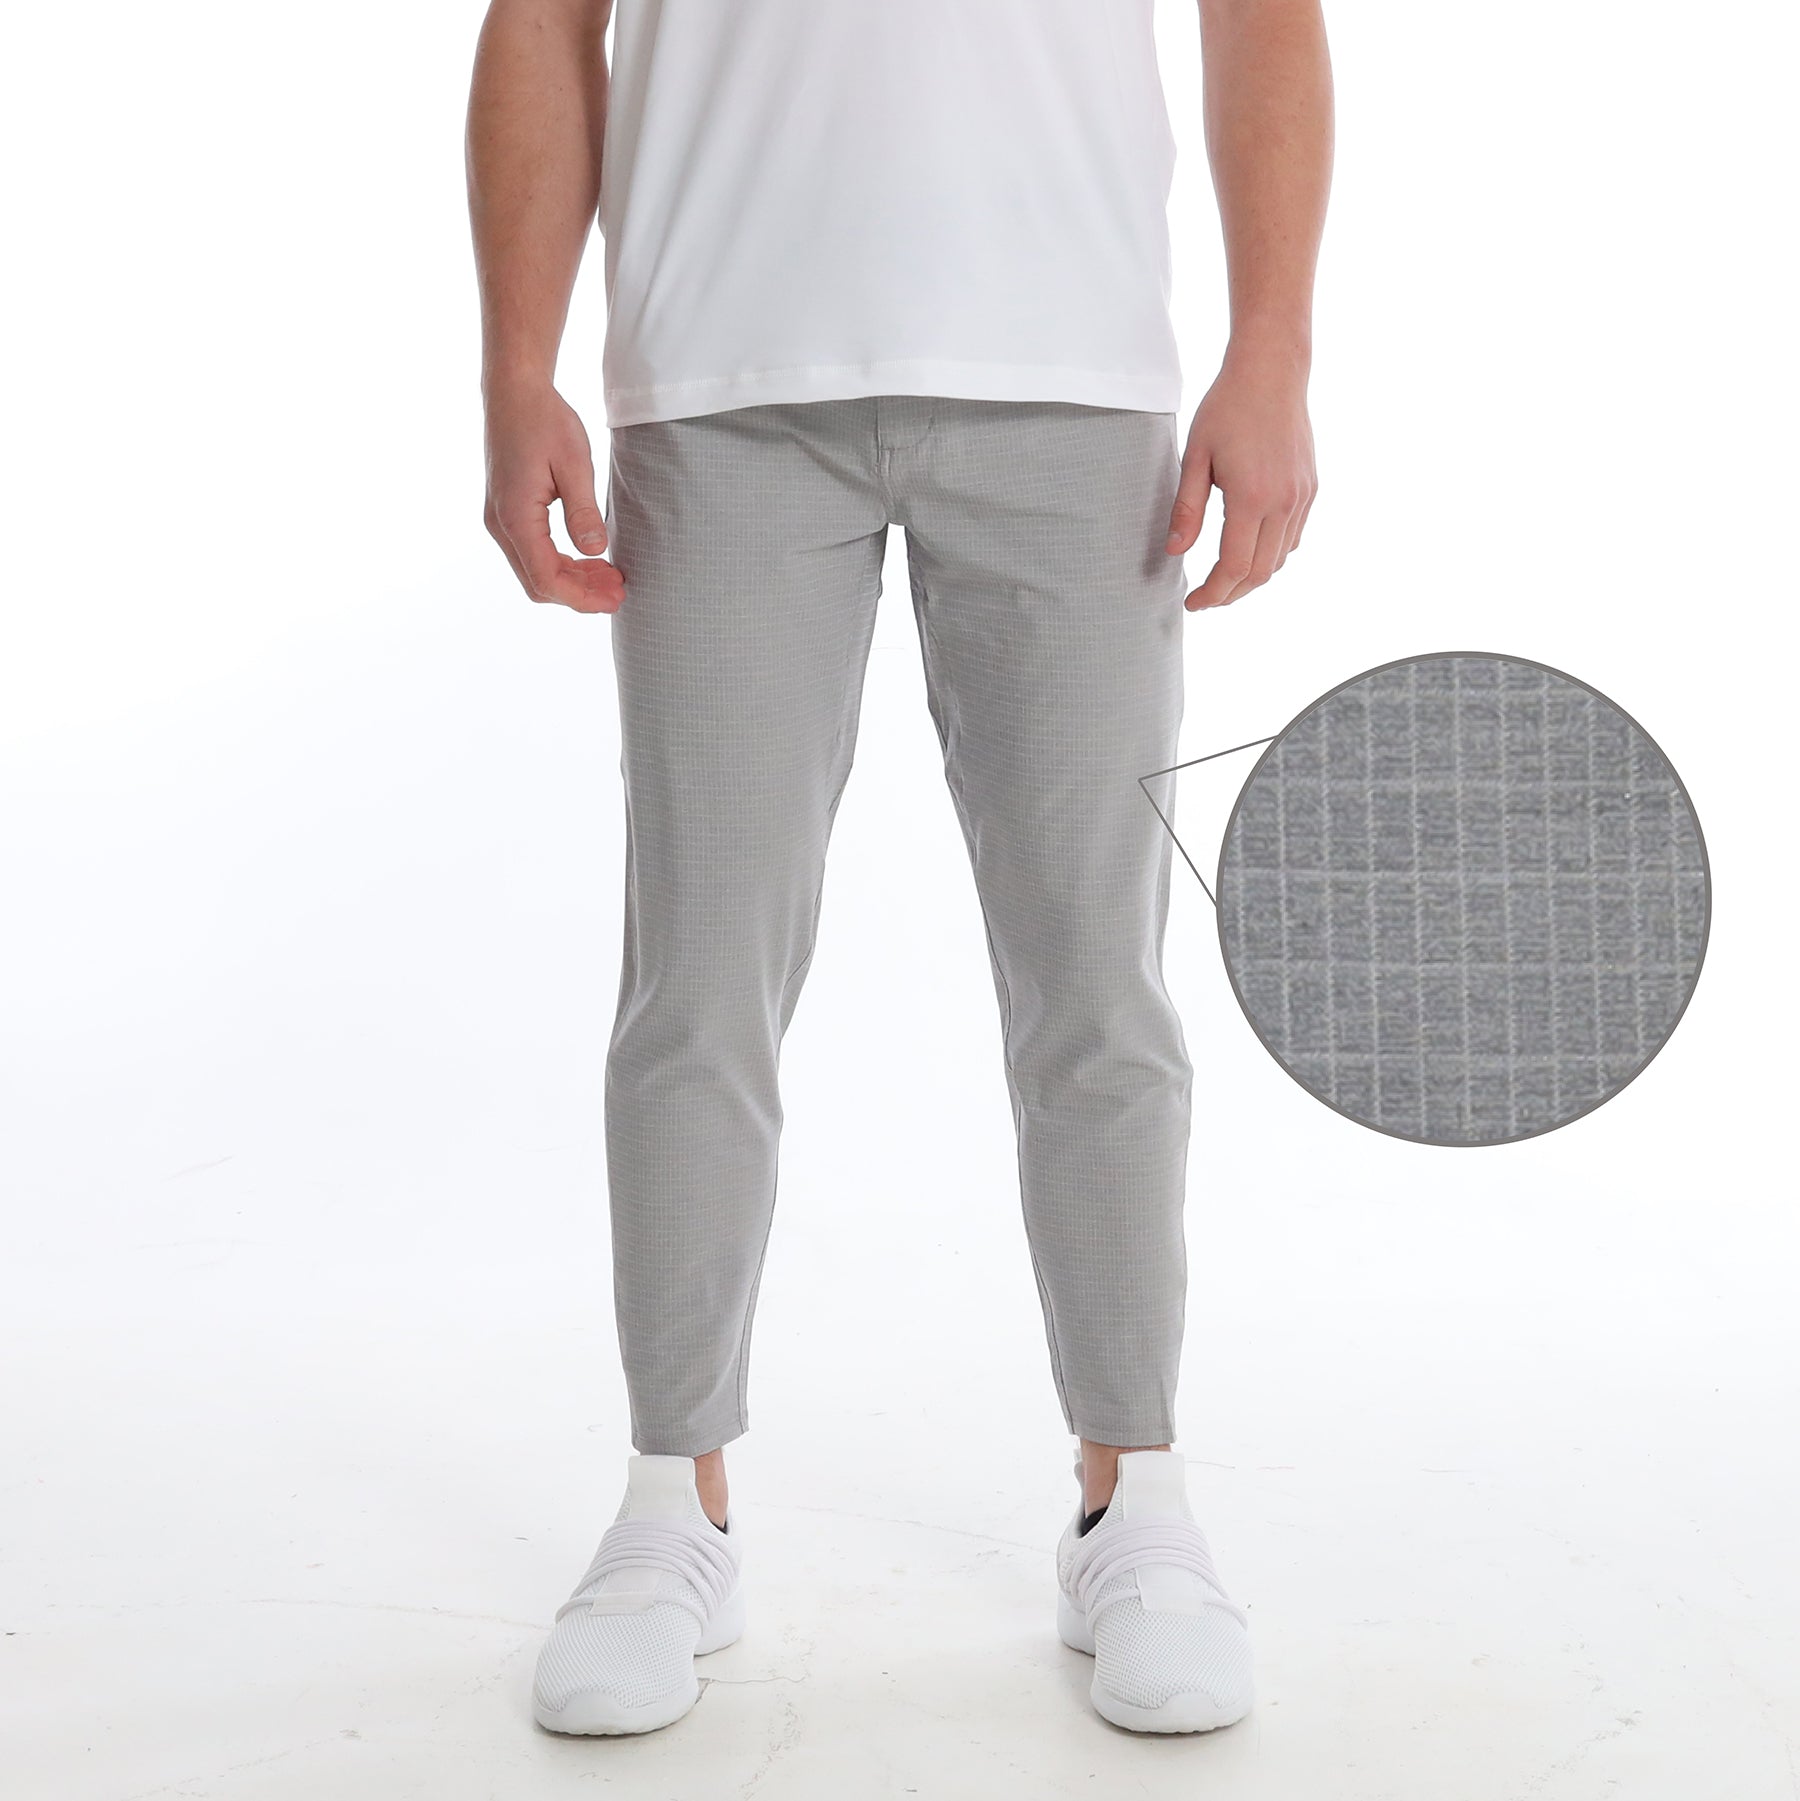 SOLUTION PANT - GREY HEATHER